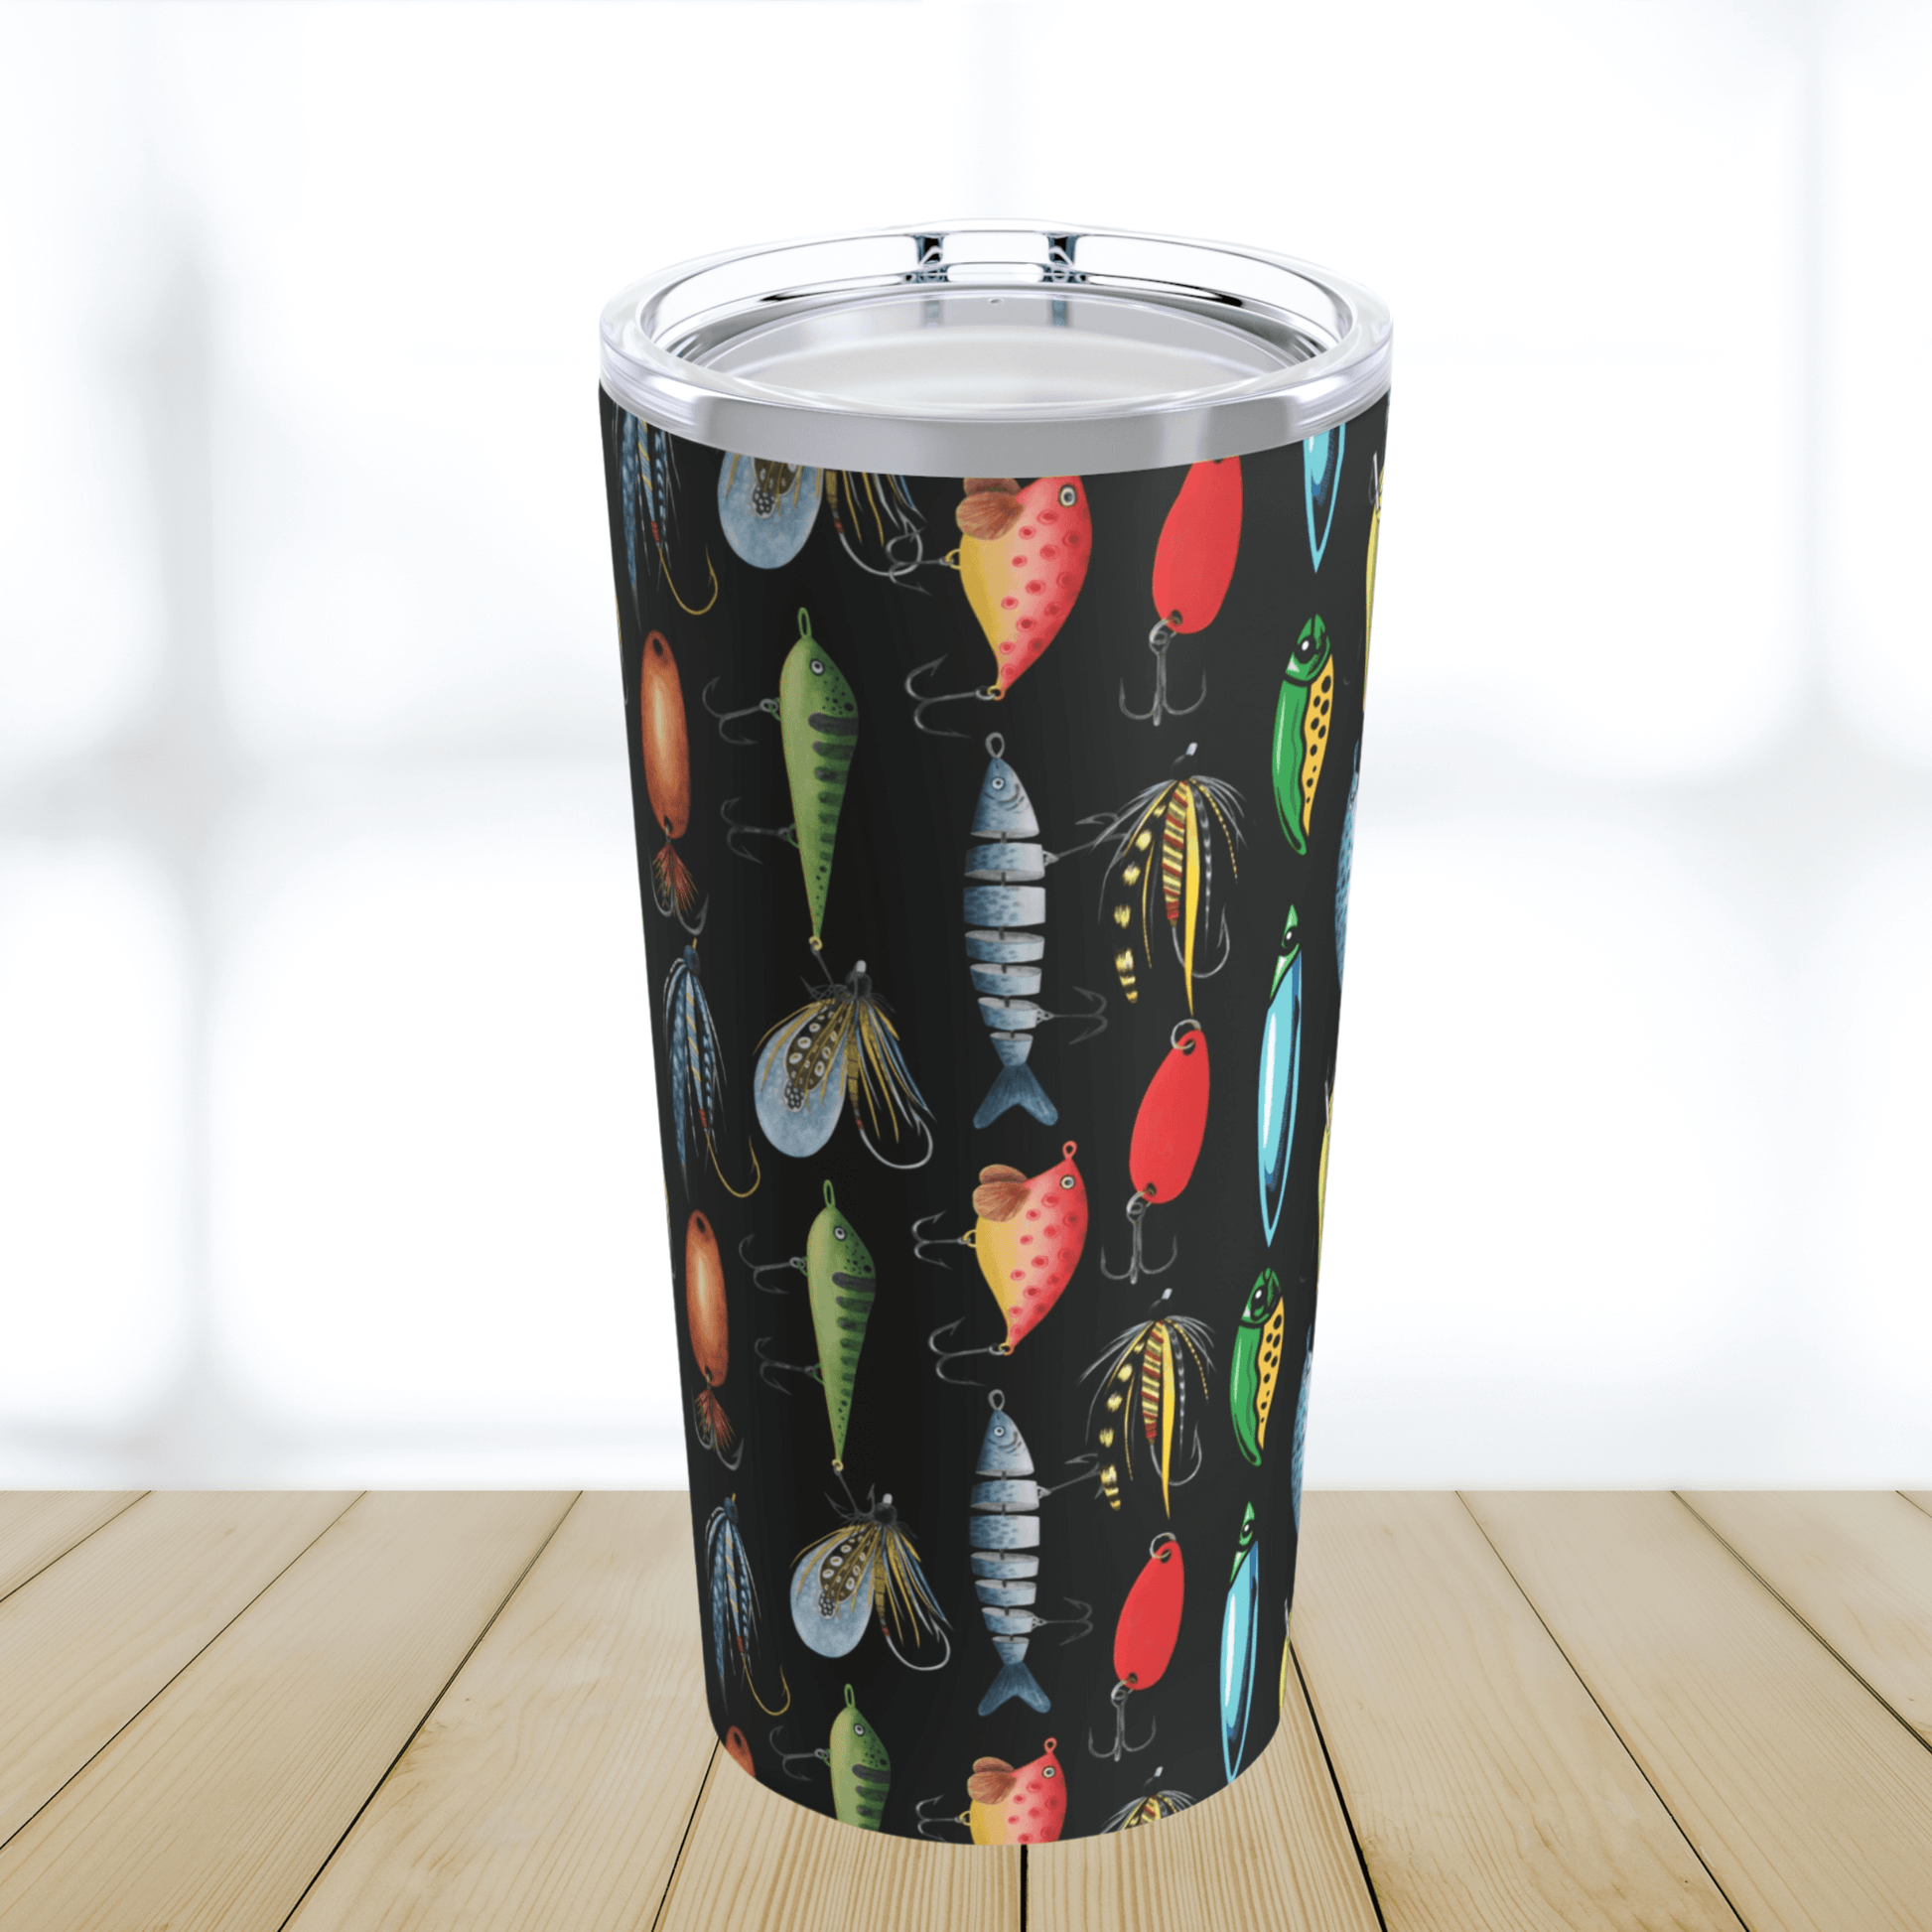 Our fishing lure tumbler cup has a black background and colorful fishing lures in greens blues reds and silver colors.